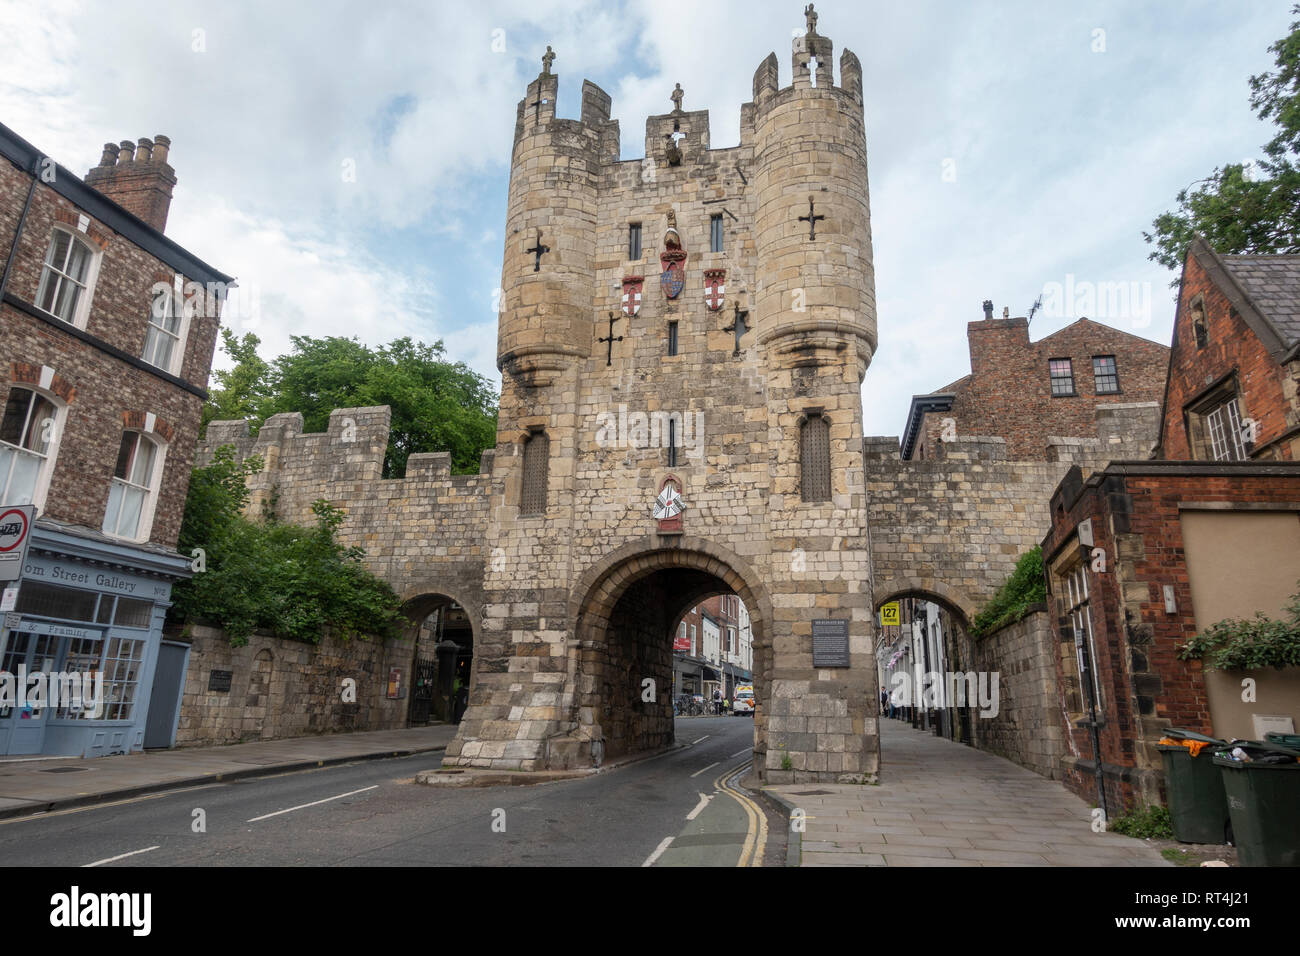 Micklegate Bar, part of the Roman City Walls, viewed from outside the wall, City of York, North Yorkshire, UK. Stock Photo